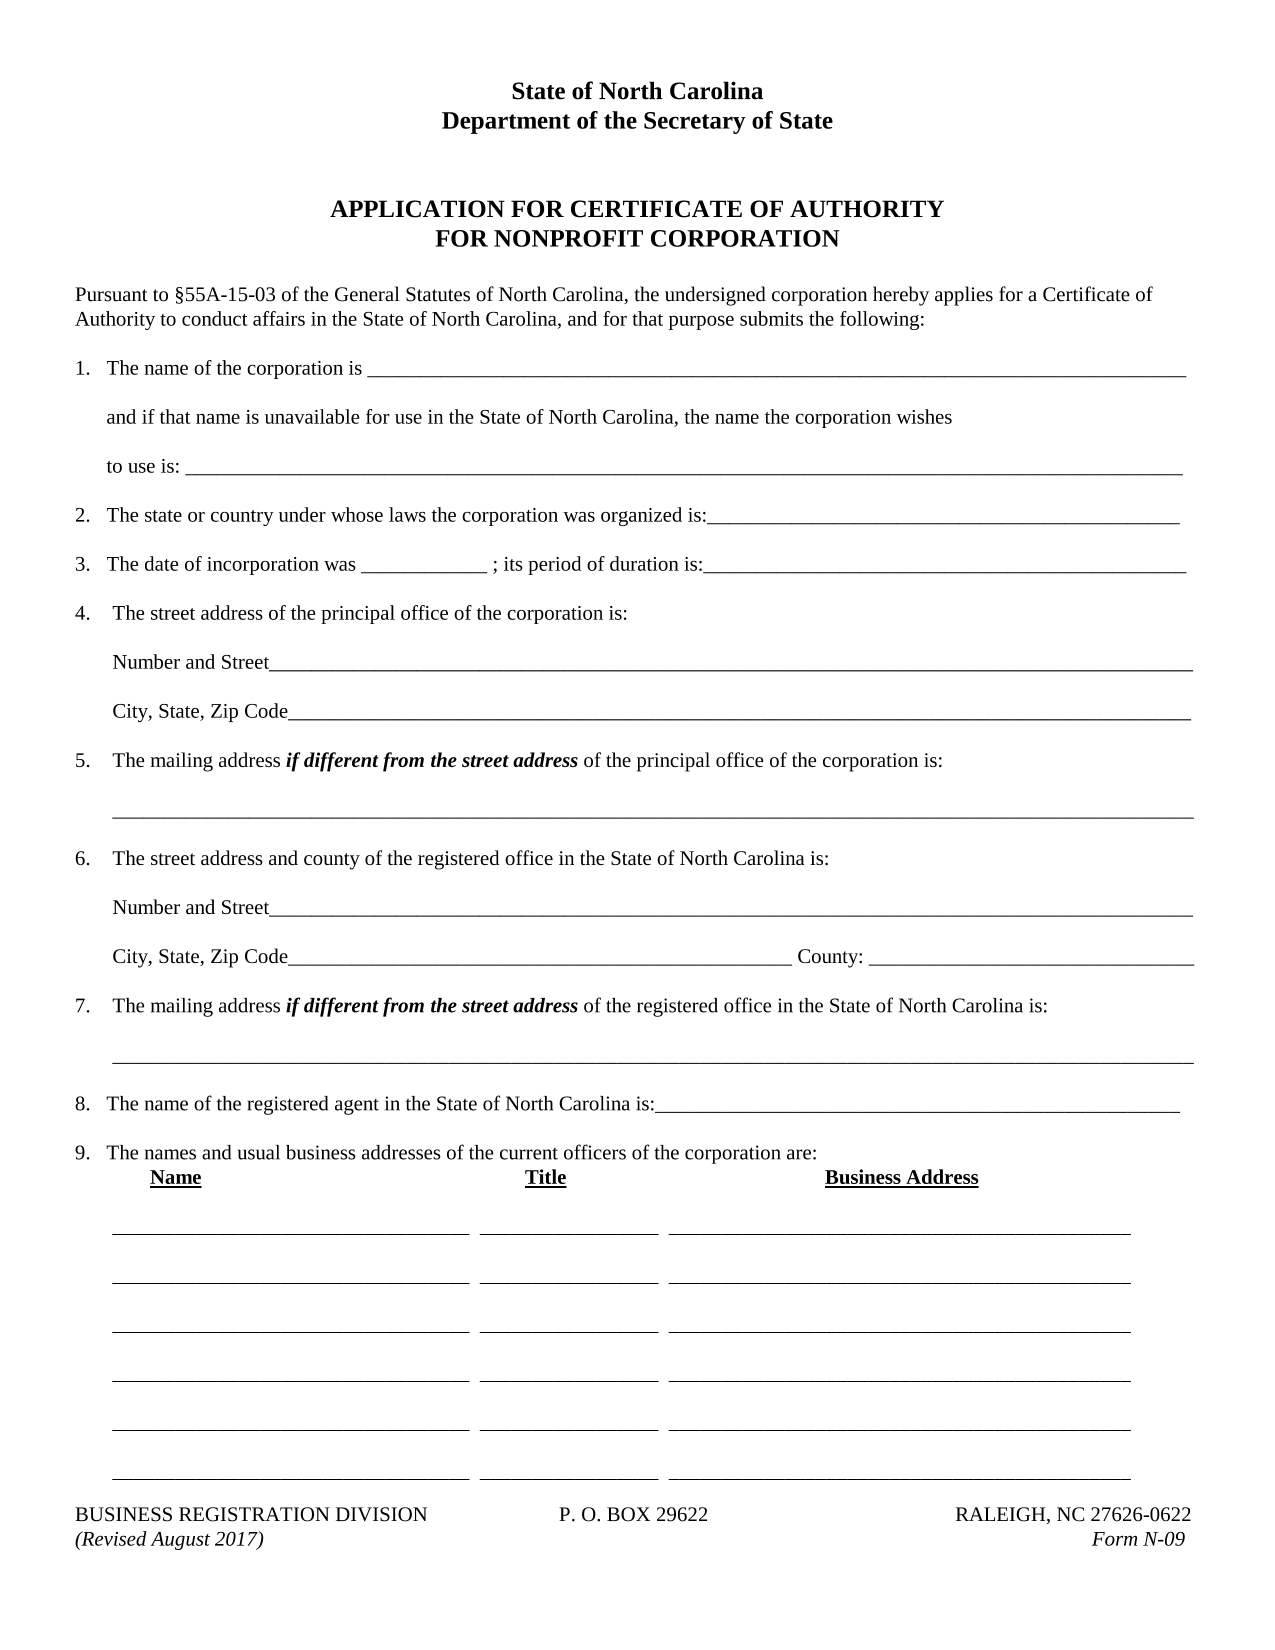 north-carolina-foreign-nonprofit-application-for-certificate-of-authority